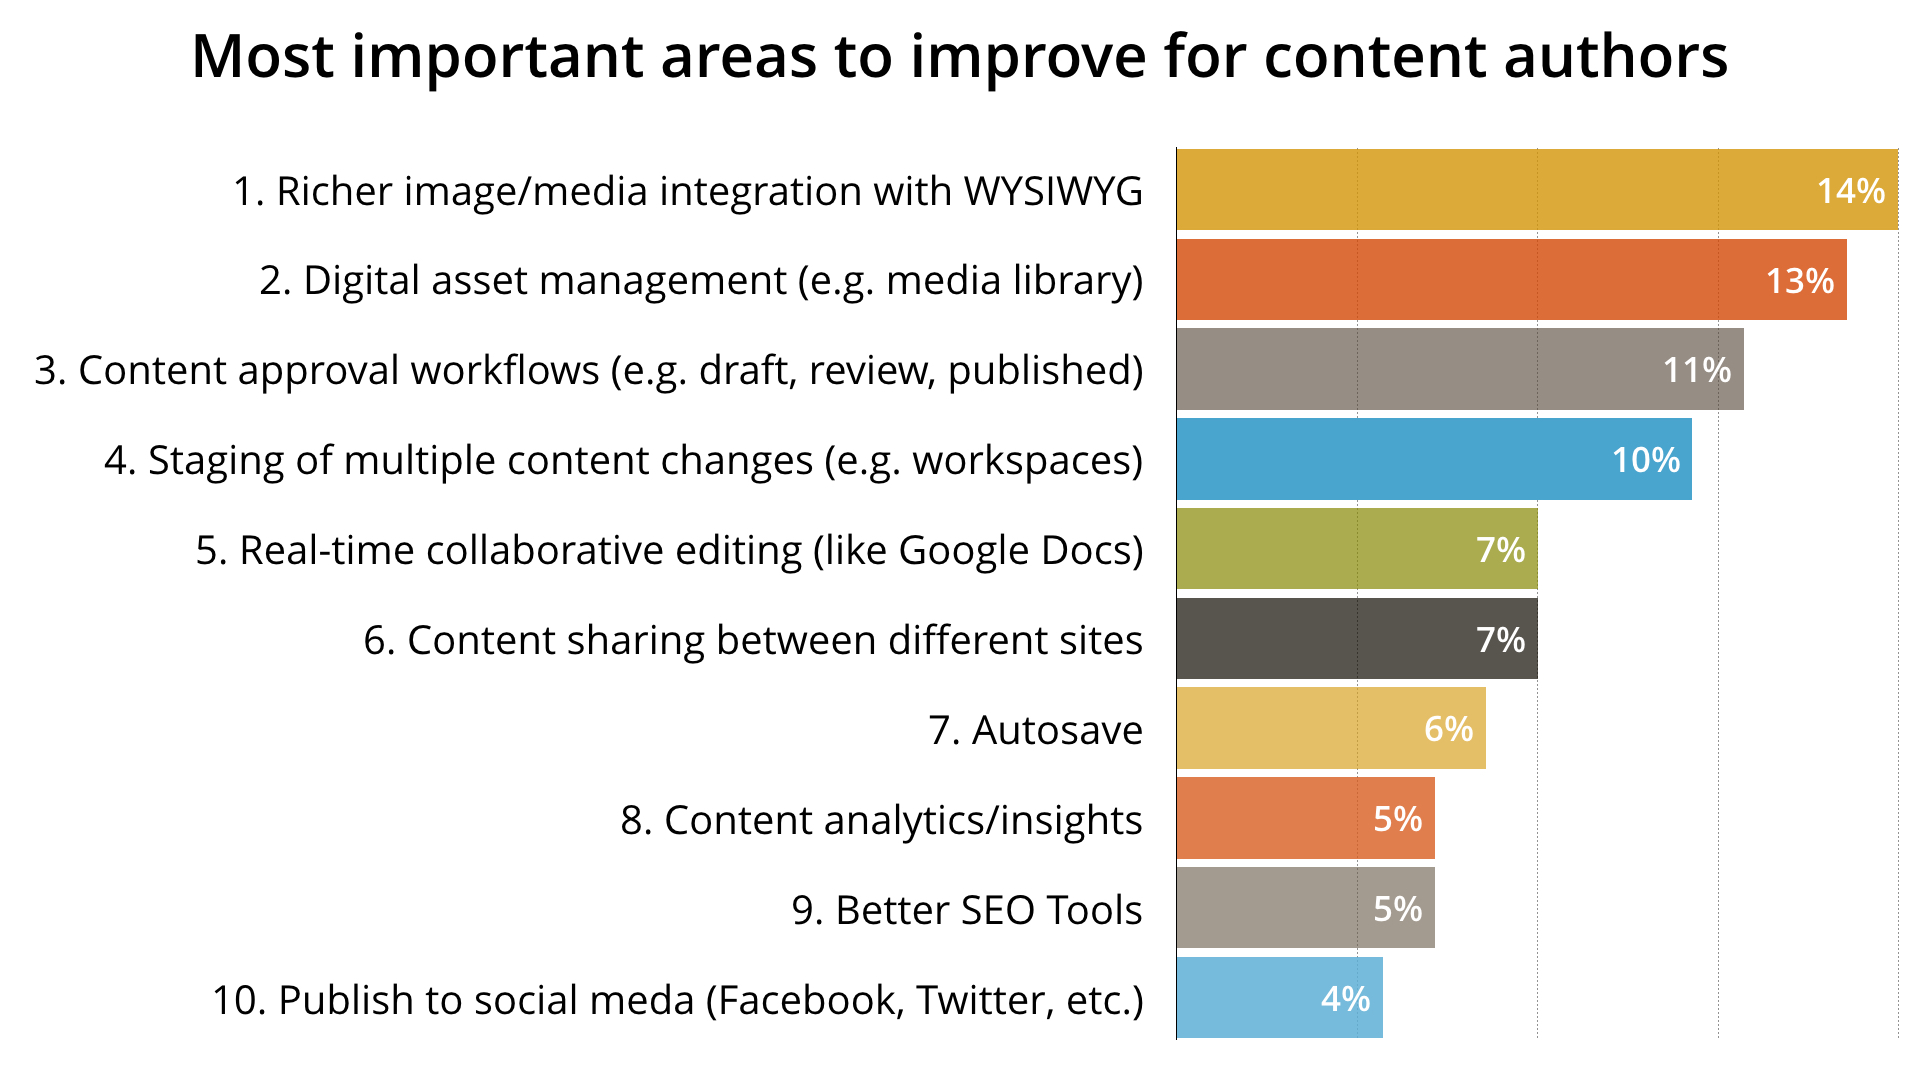 Survey results from content editors in 2016